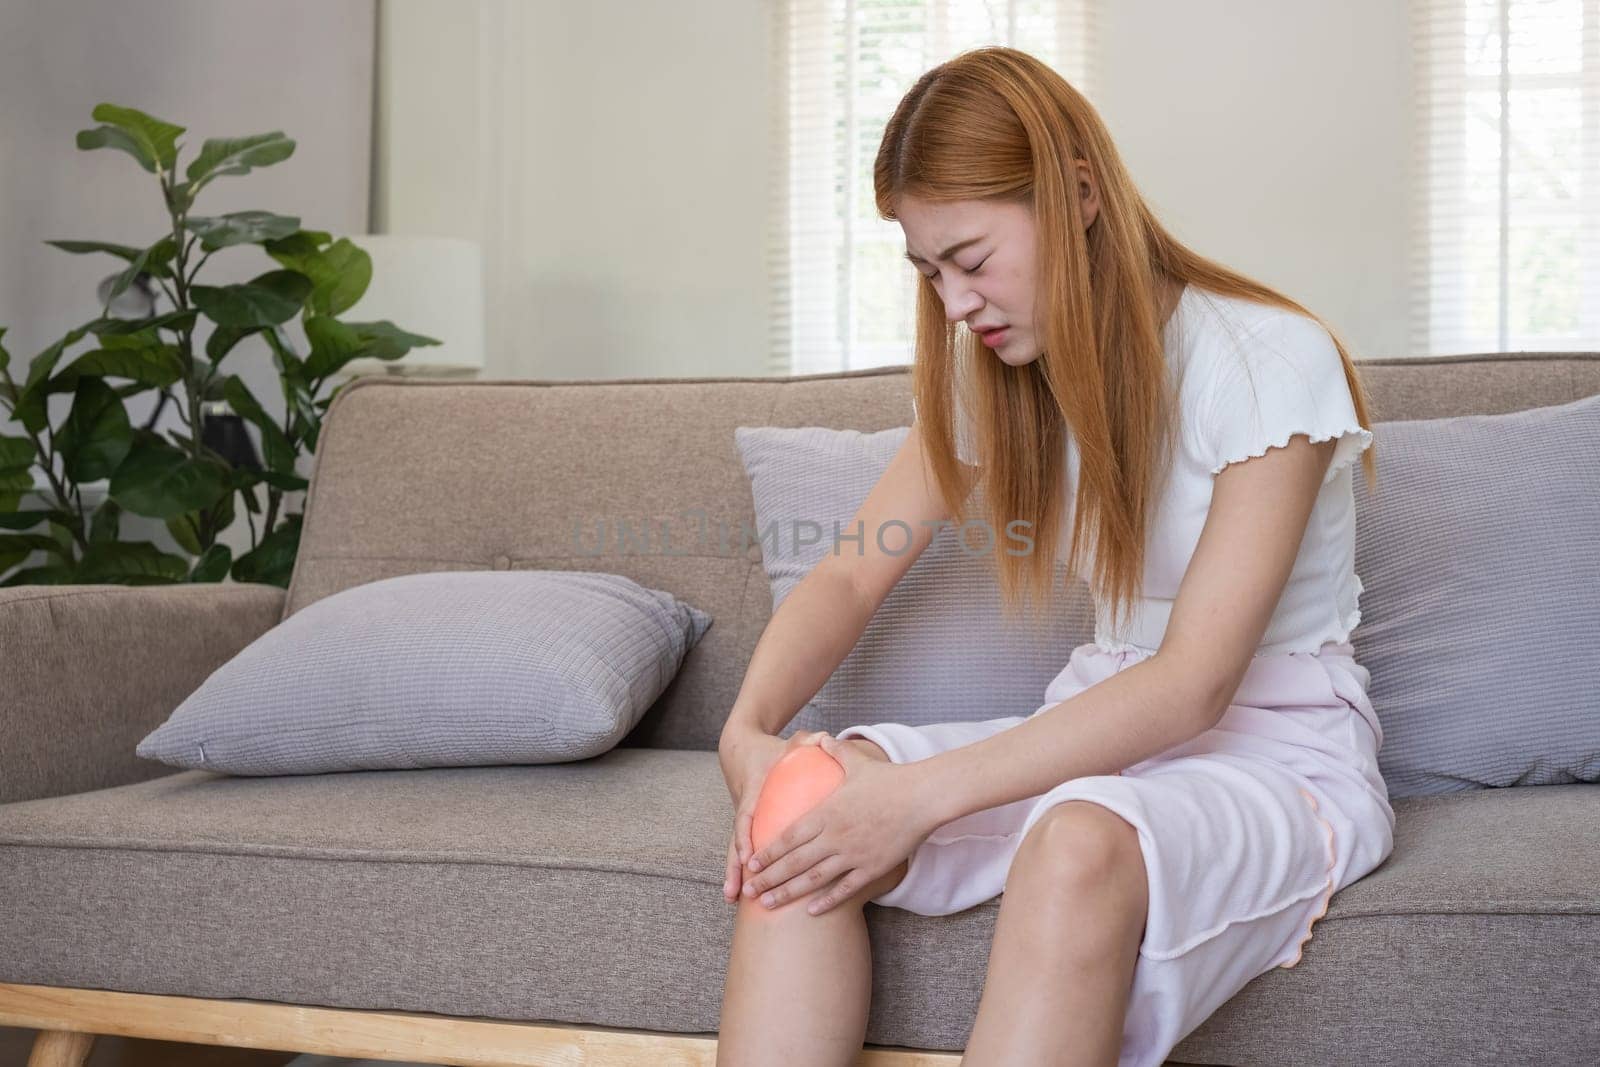 Asian woman experiencing knee pain at home. Concept of joint discomfort, pain relief, and health issues.